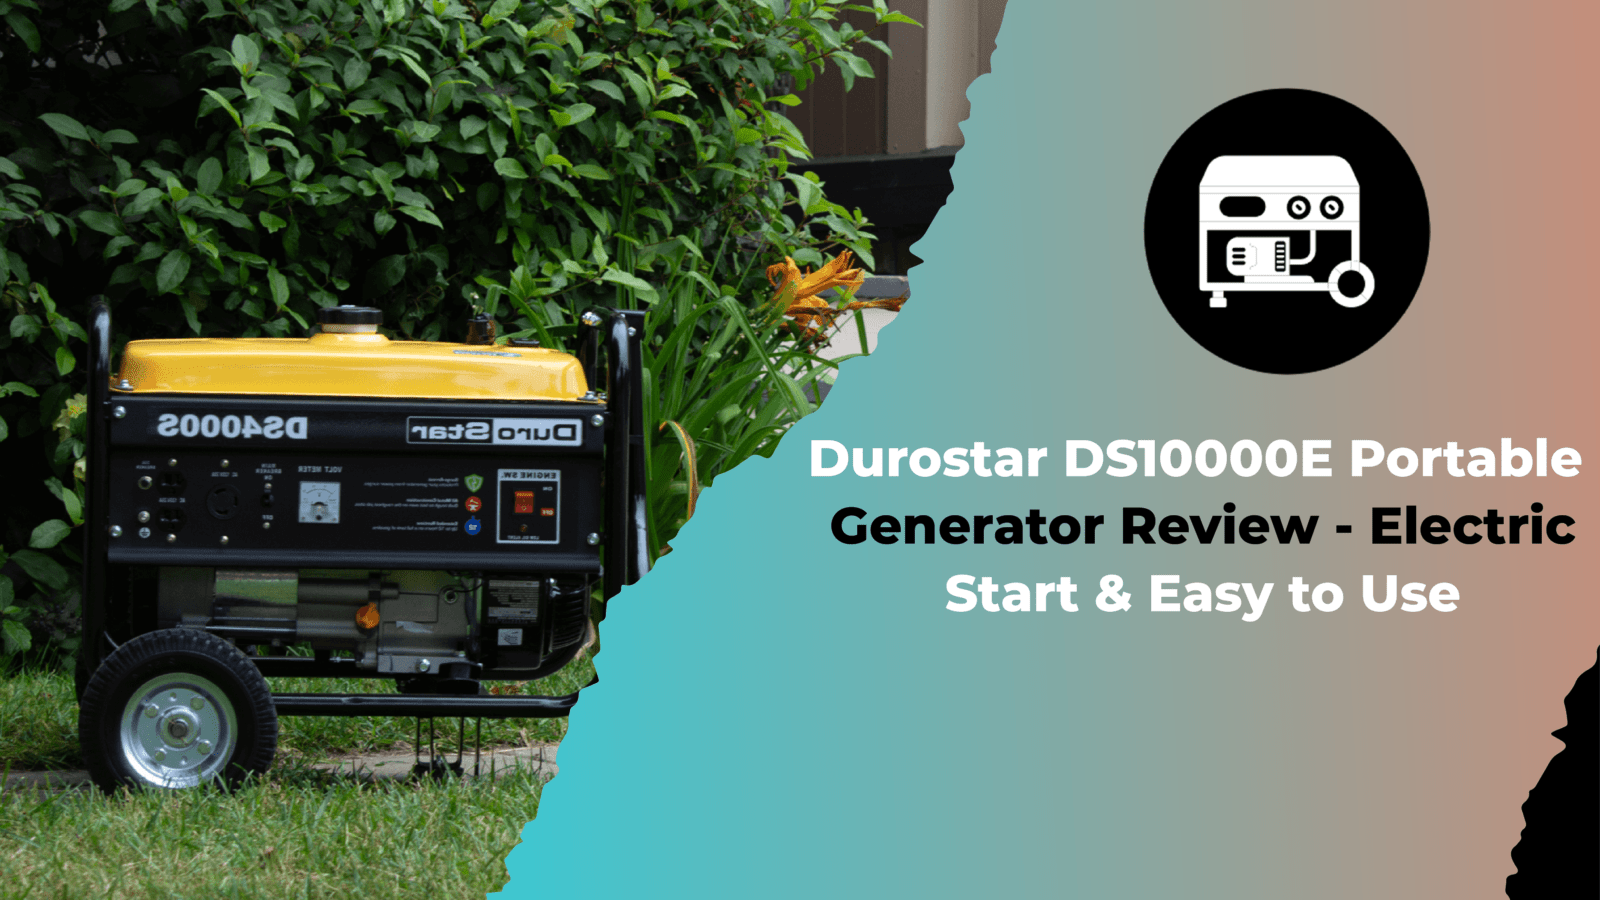 Durostar DS10000E Portable Generator Review - Electric Start & Easy to Use